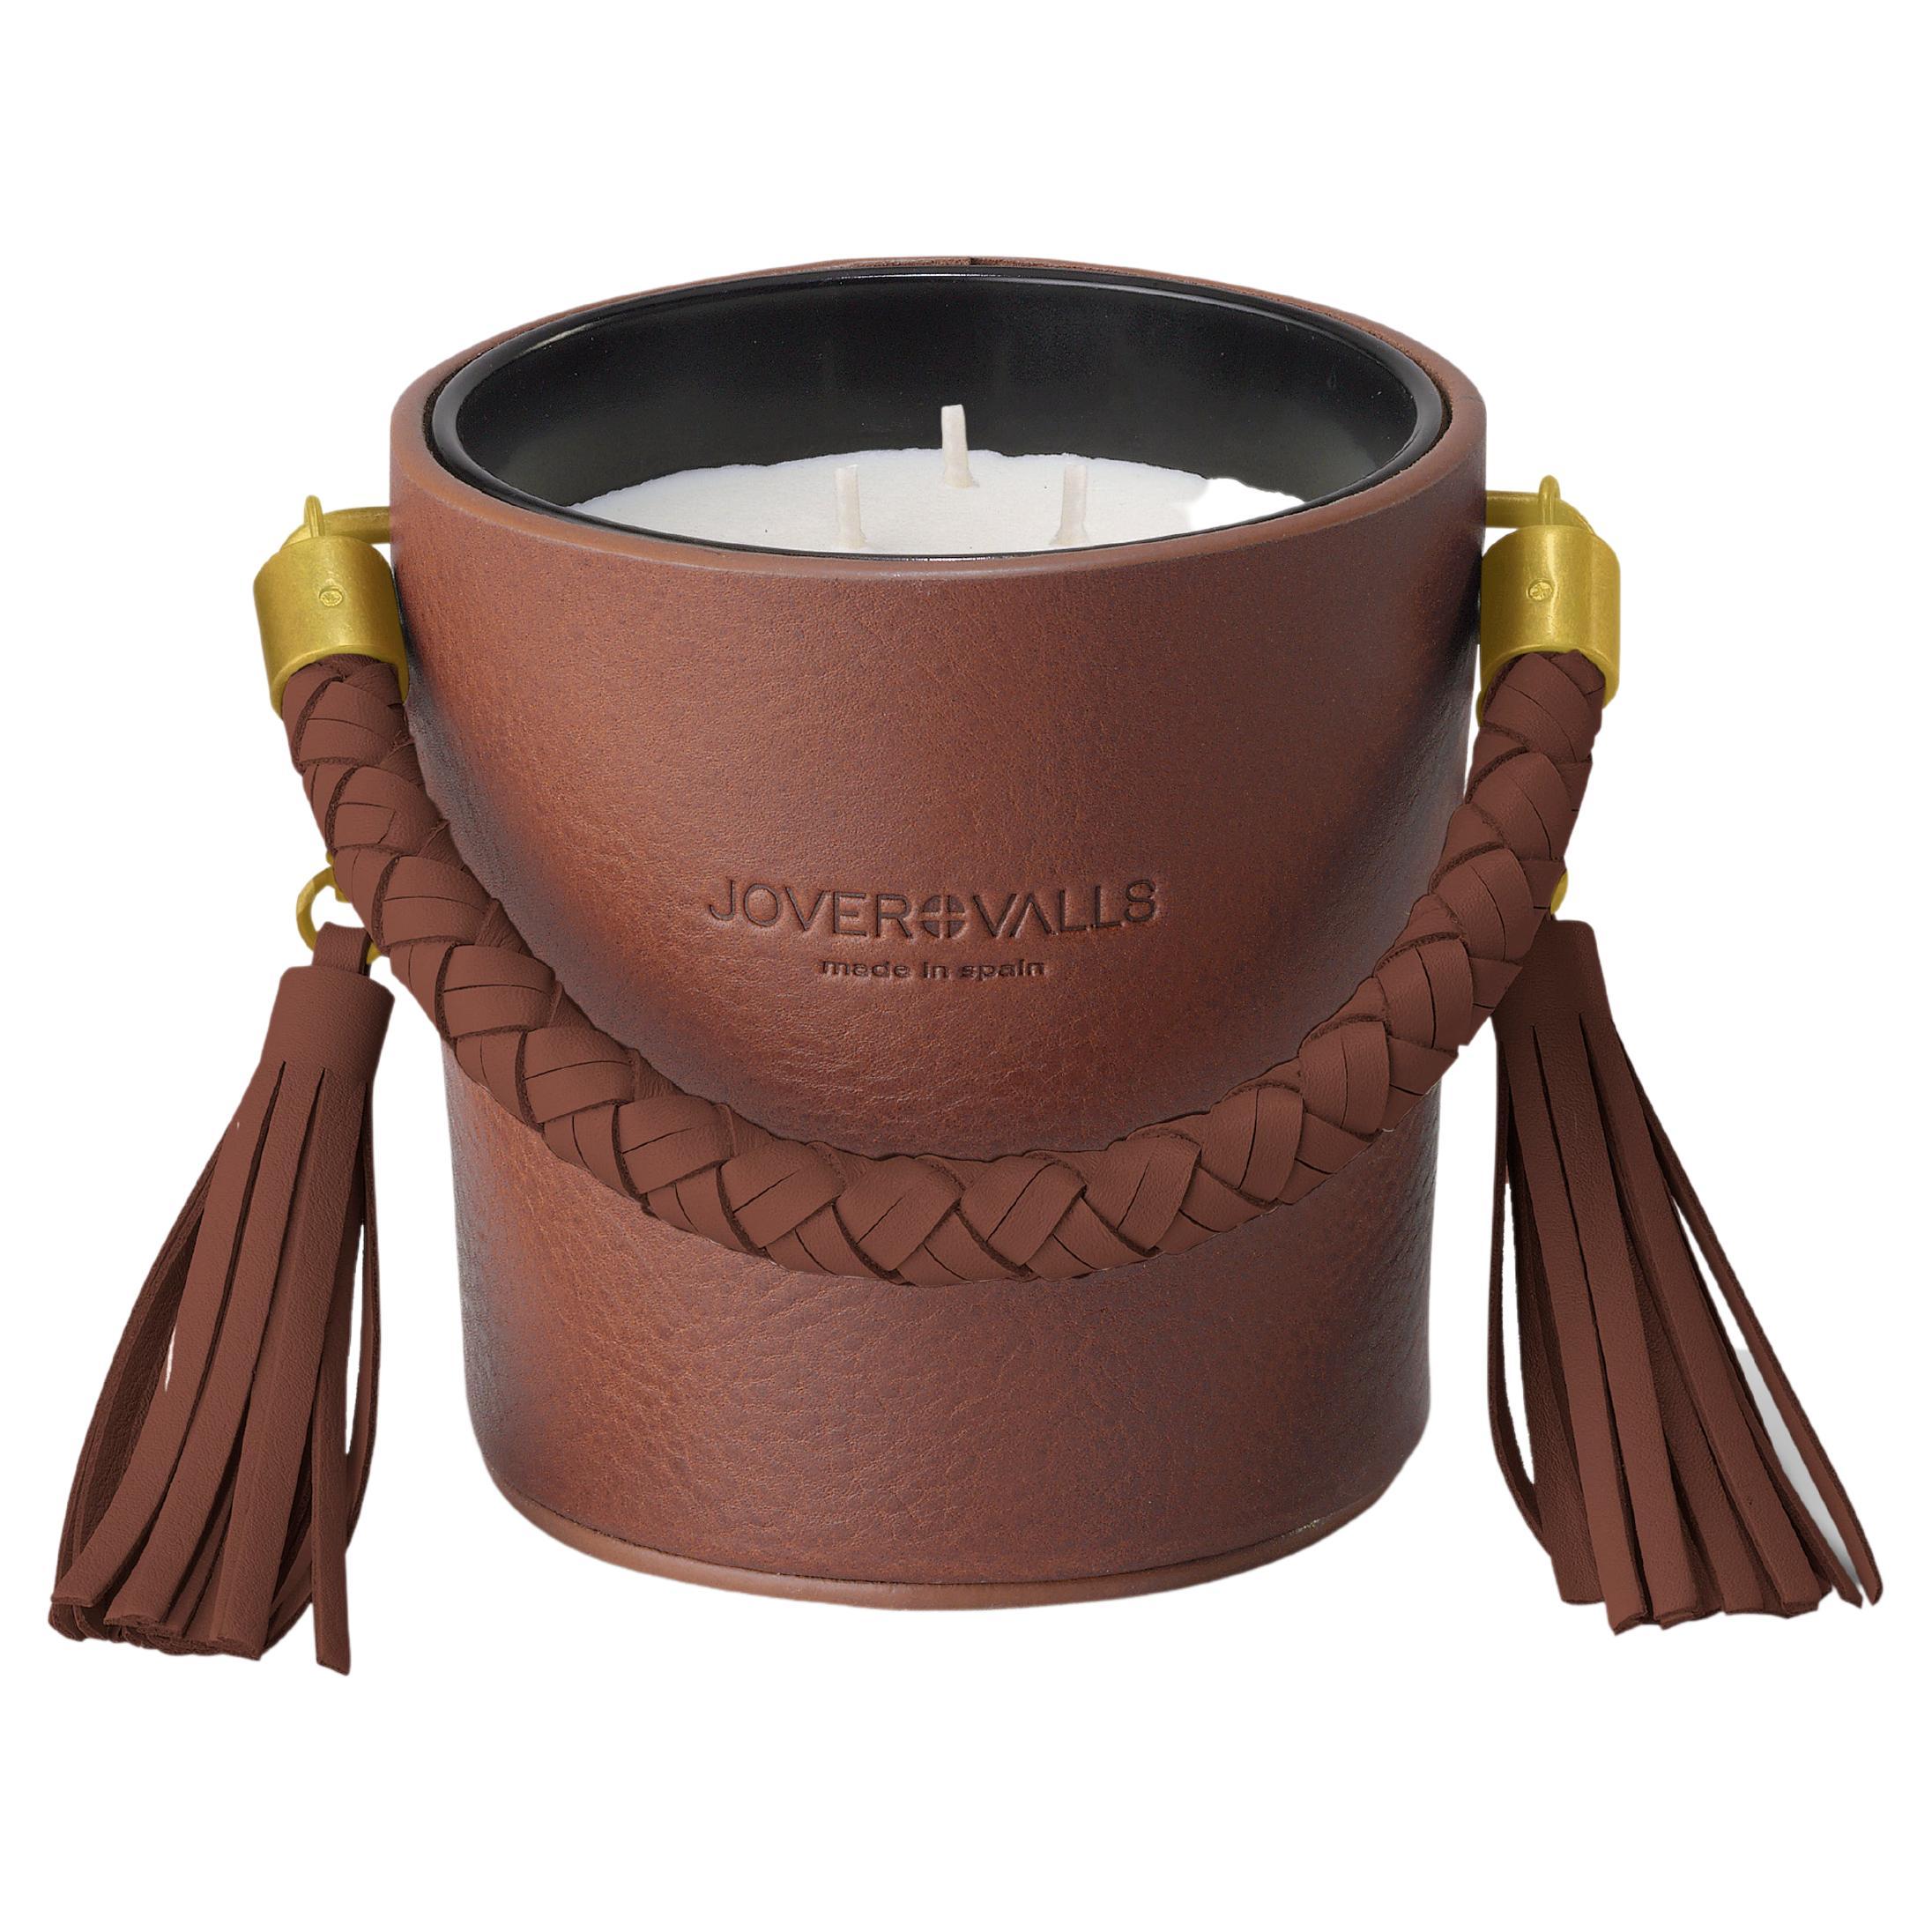 Bucket, Dark Brown Leather Candleholder, Oud Wood & Roses Scented Candle 21 Oz. 